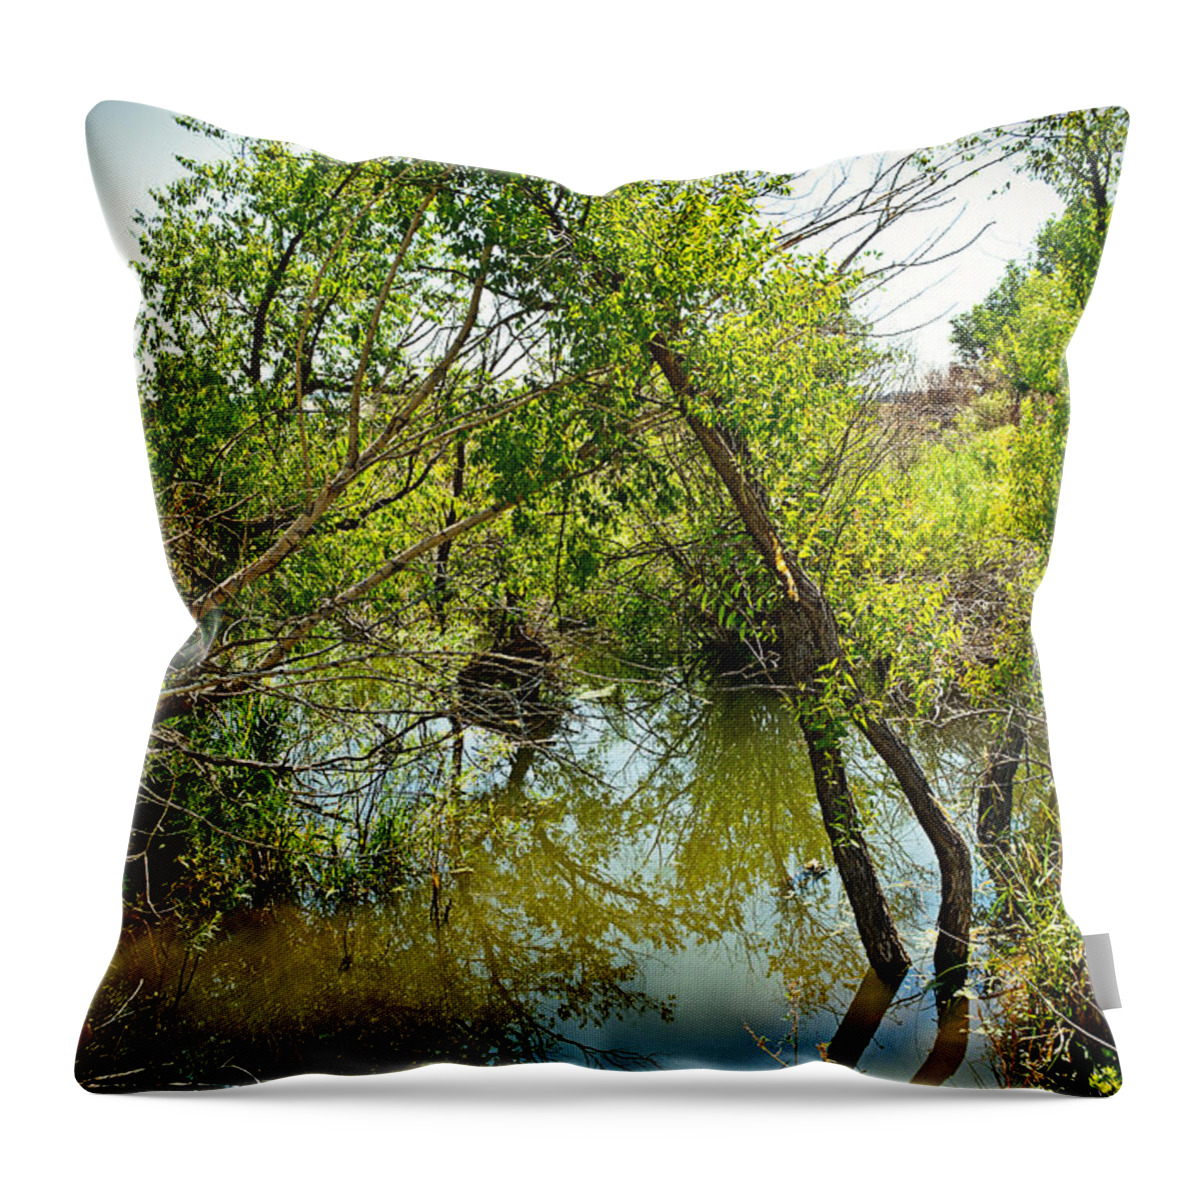 Cherry Creek Throw Pillow featuring the photograph Cherry Creek Trail Study 3 by Robert Meyers-Lussier